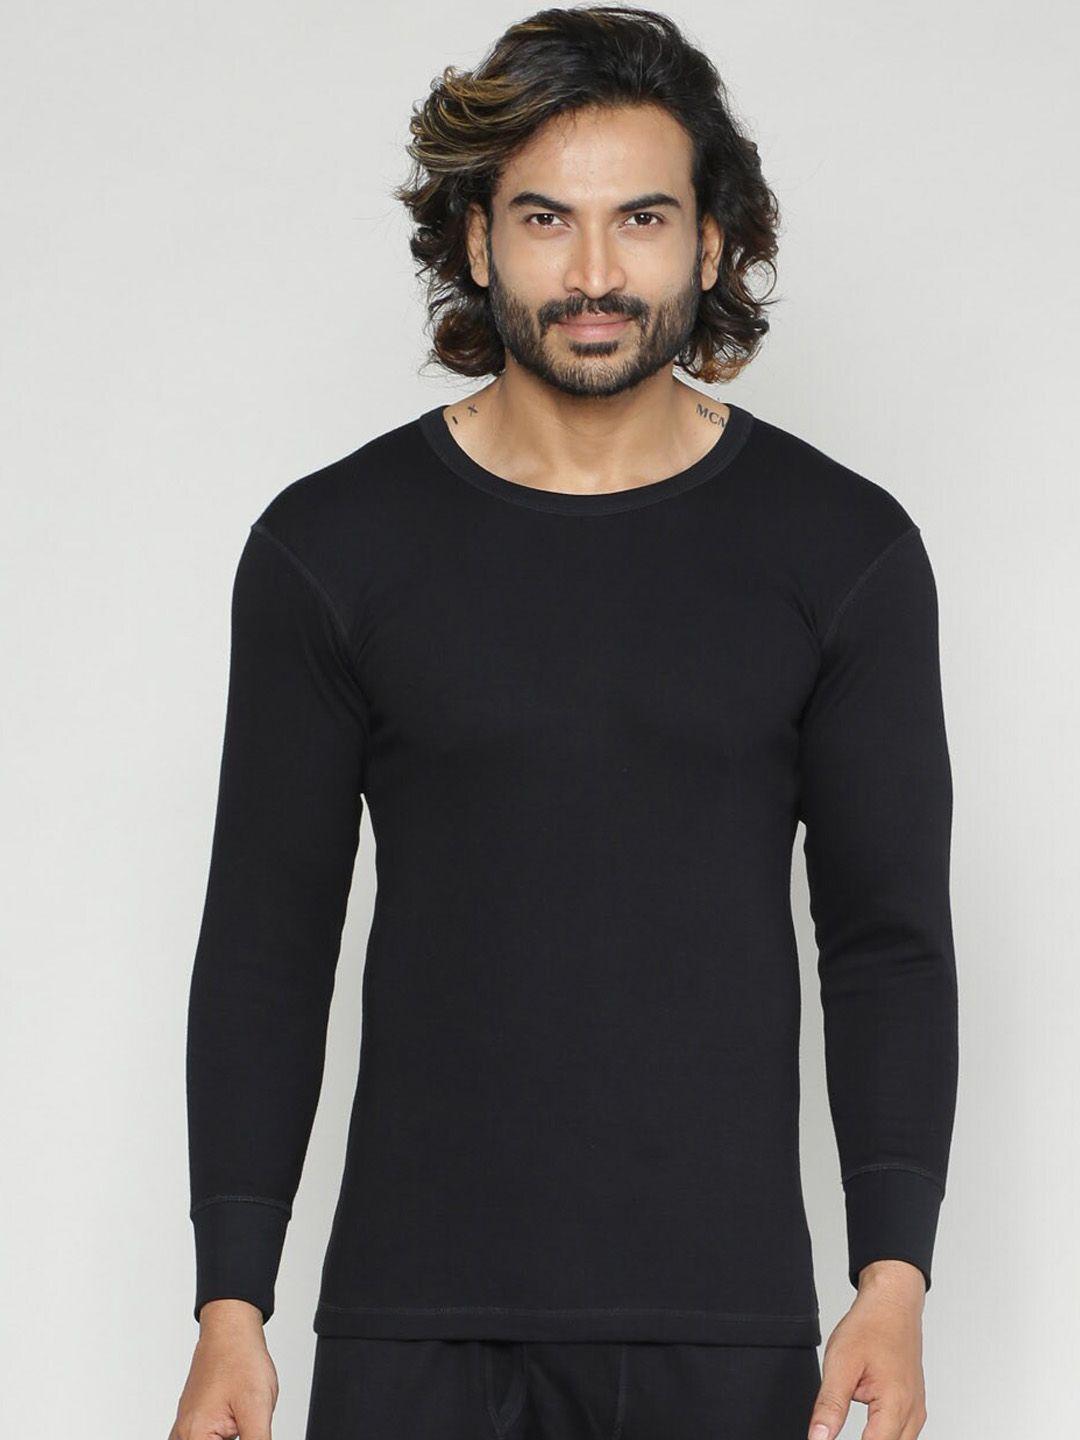 inferno multifiber layered long sleeves cotton thermal top